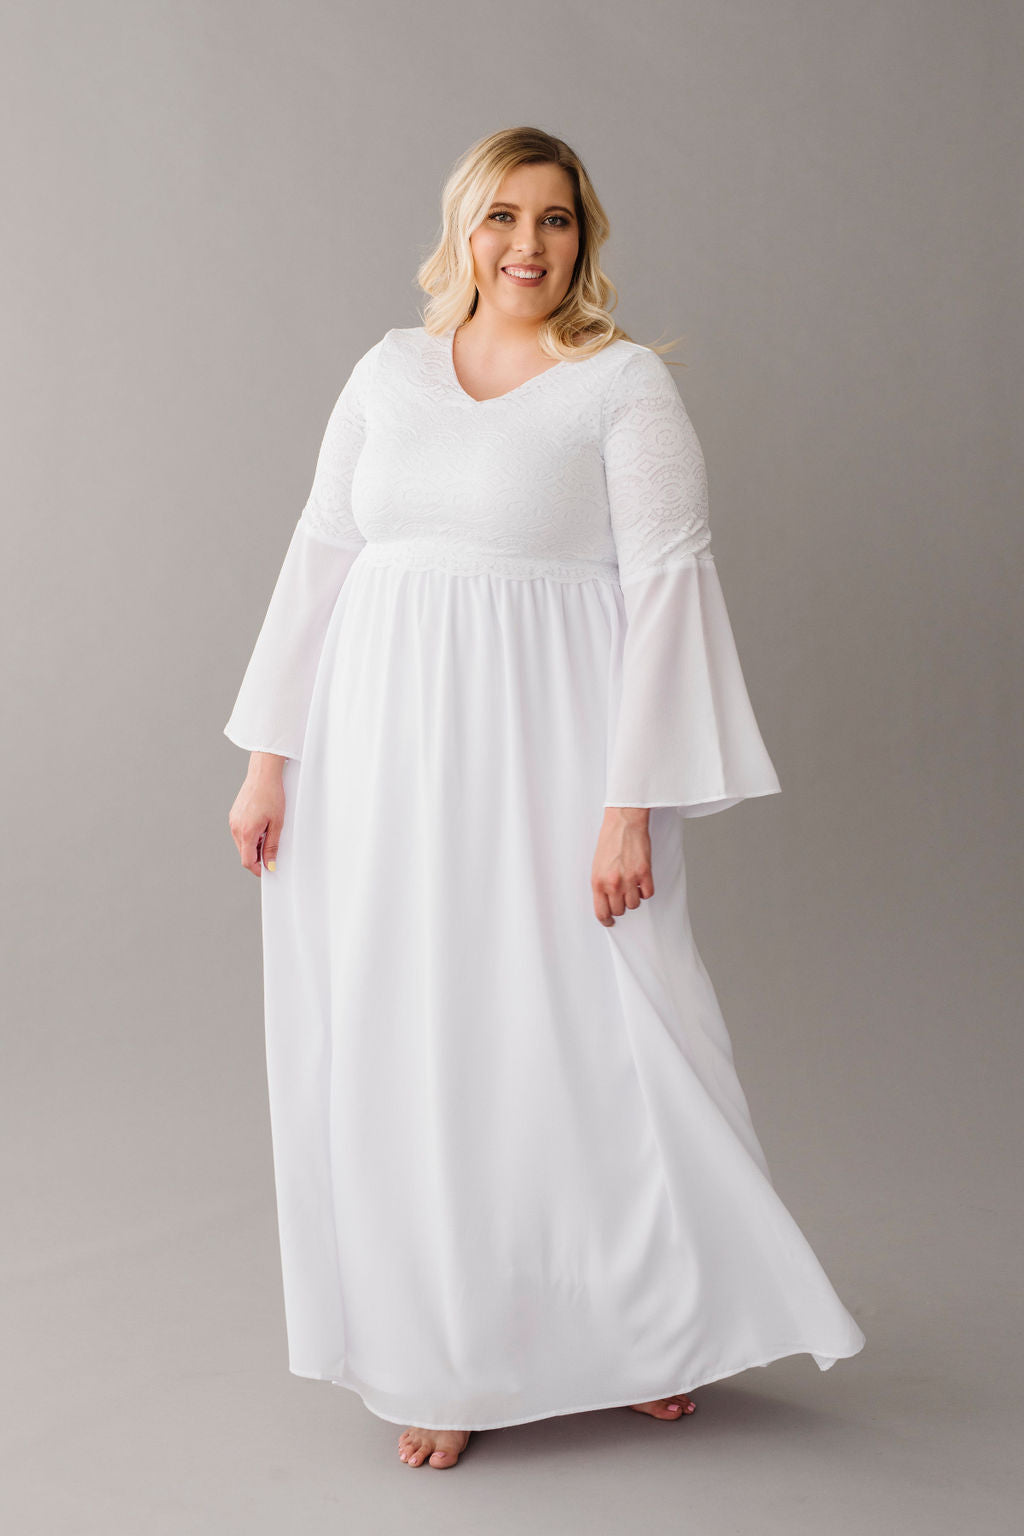 Lds White Temple Dresses Top Sellers ...